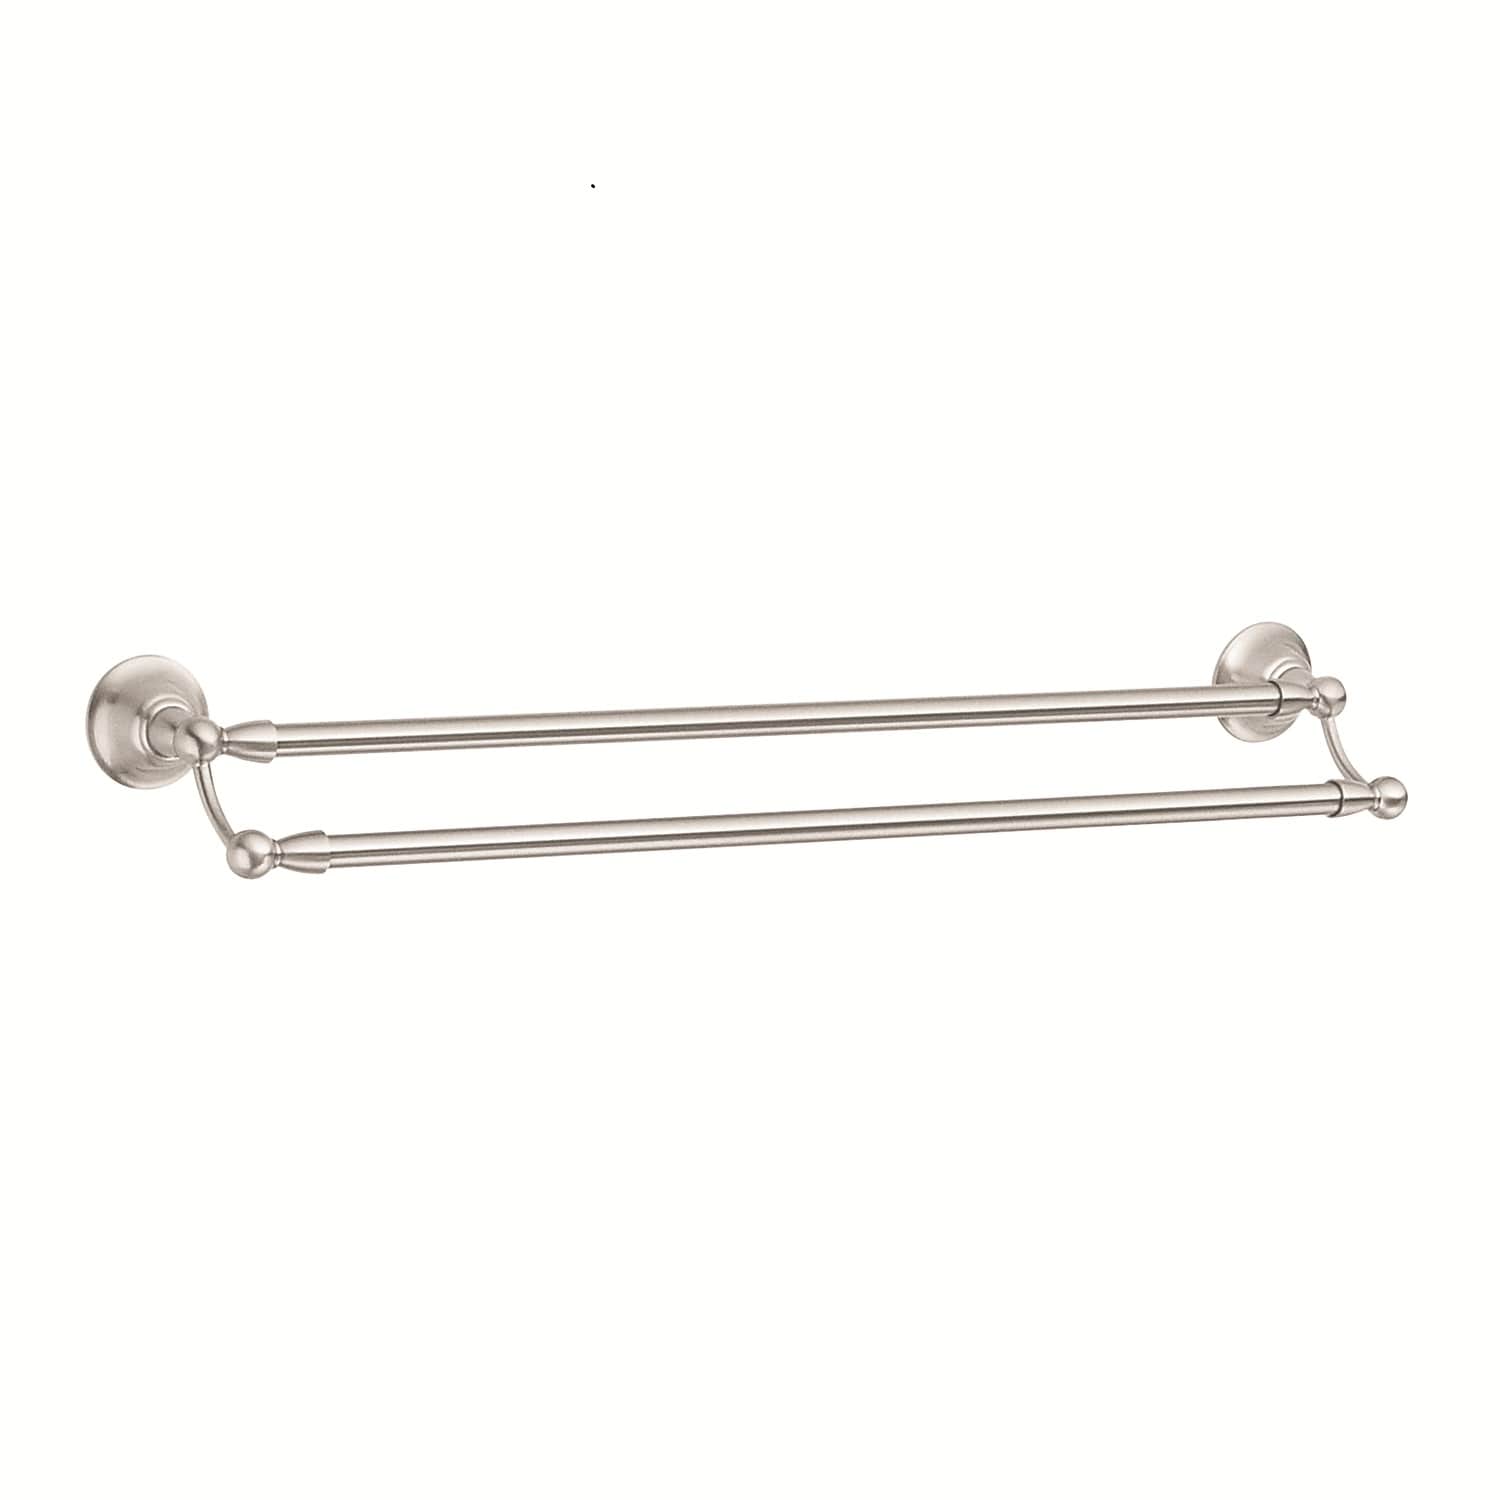 24 in. Wall-Mounted Aluminum Towel Rack with Towel Bar Holder Foldable